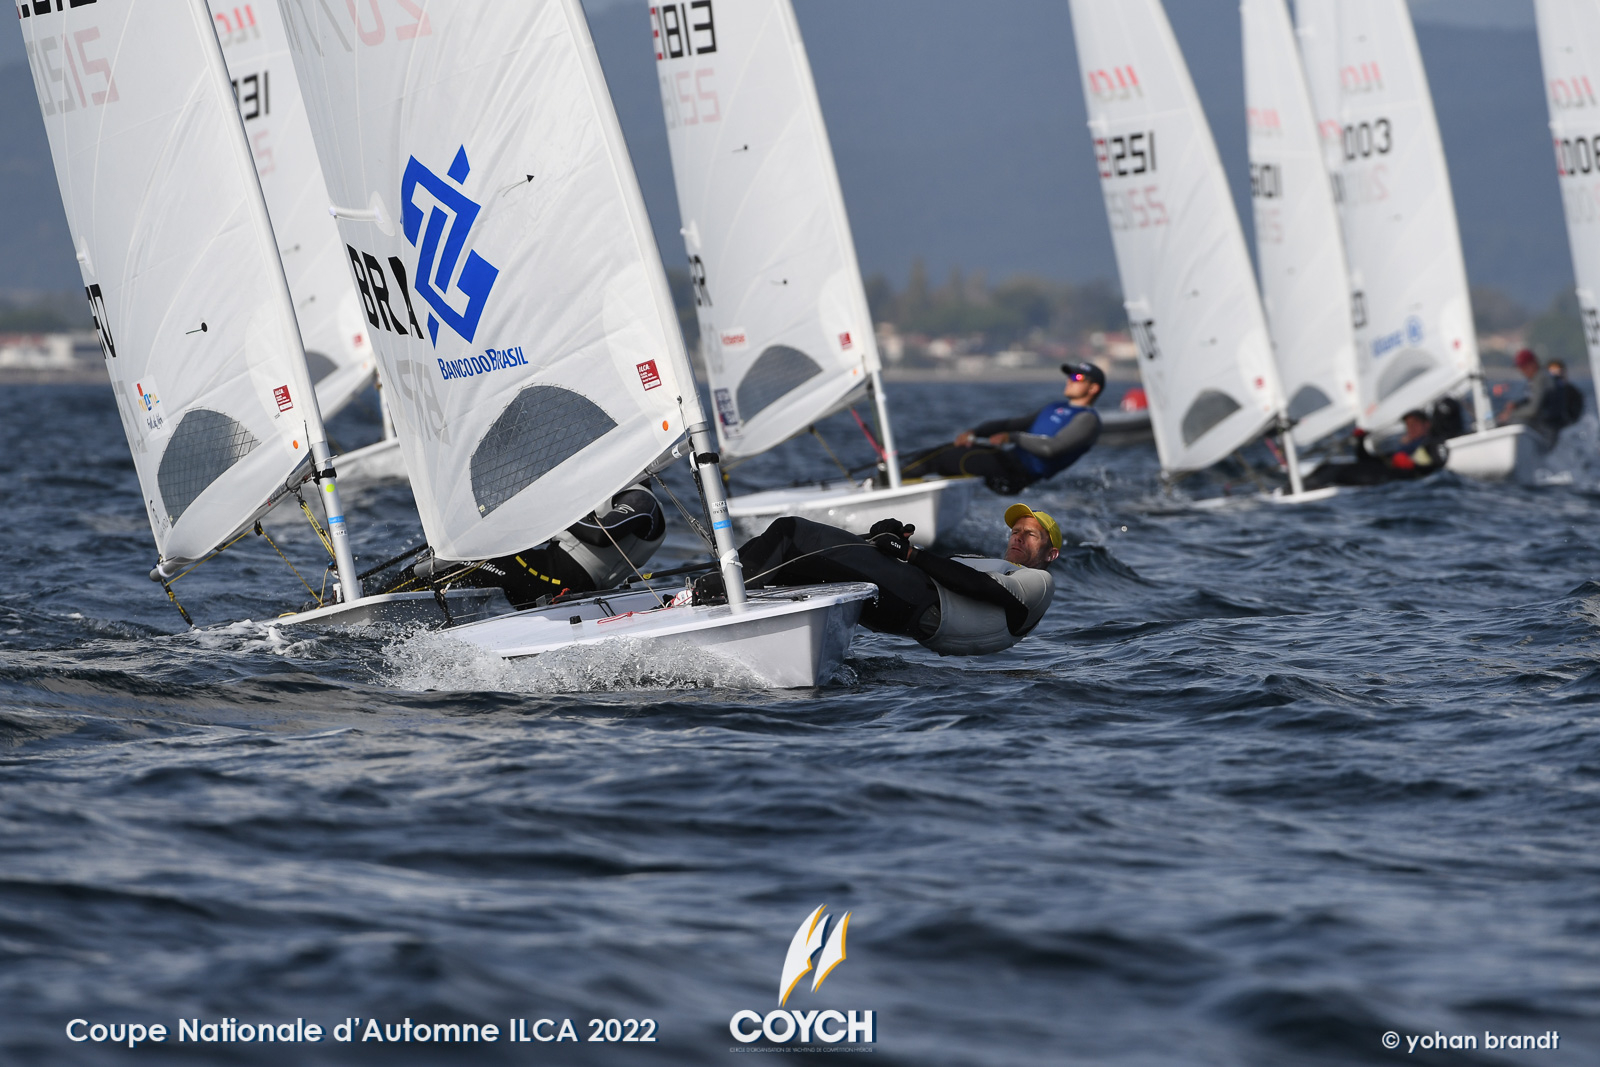  ILCA  Coupe National d'automne  Hyeres FRA  Final results